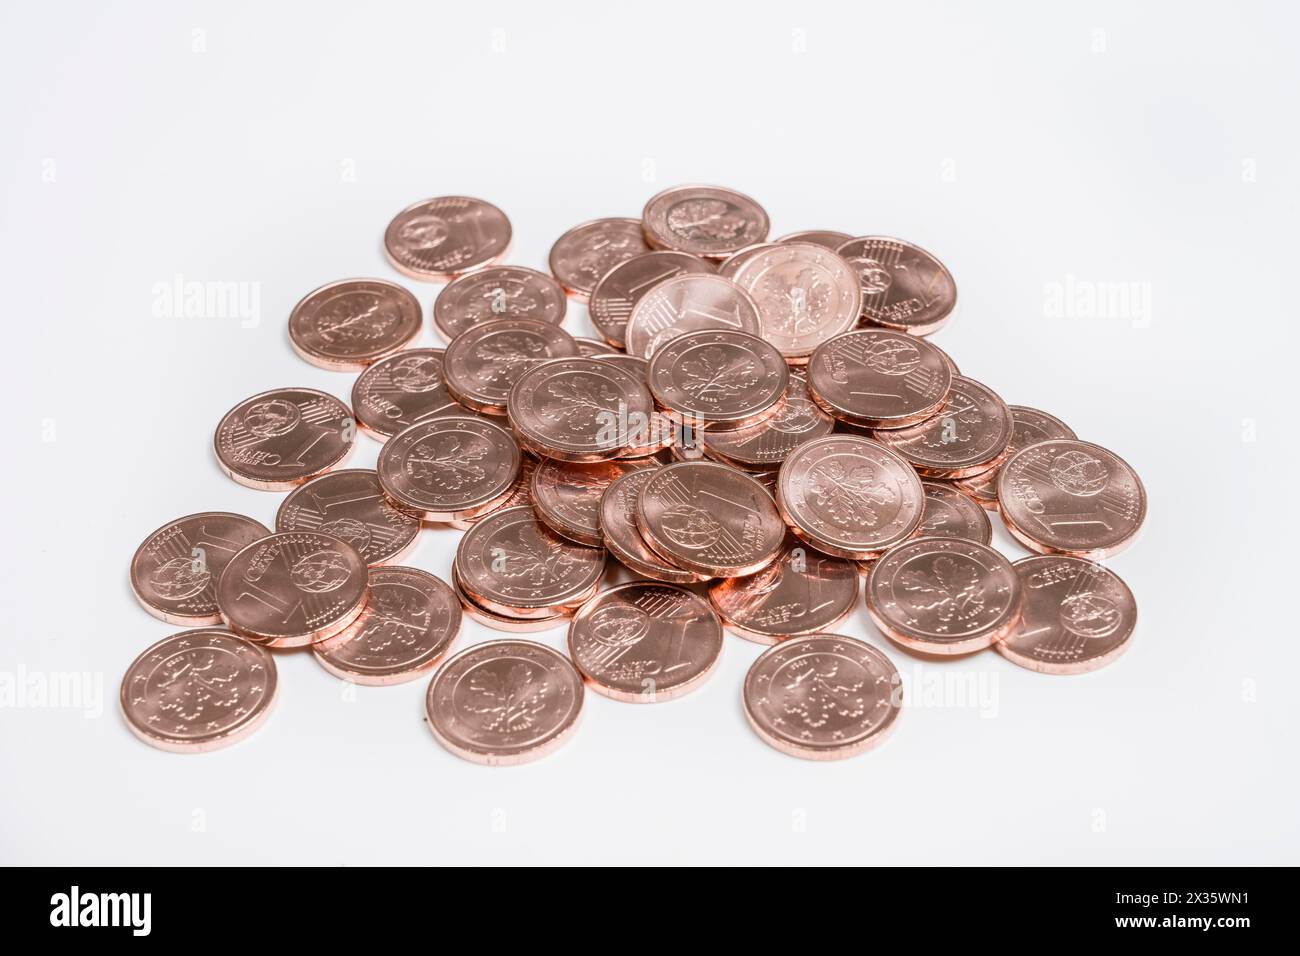 1 cent coins, small change, copper money Stock Photo